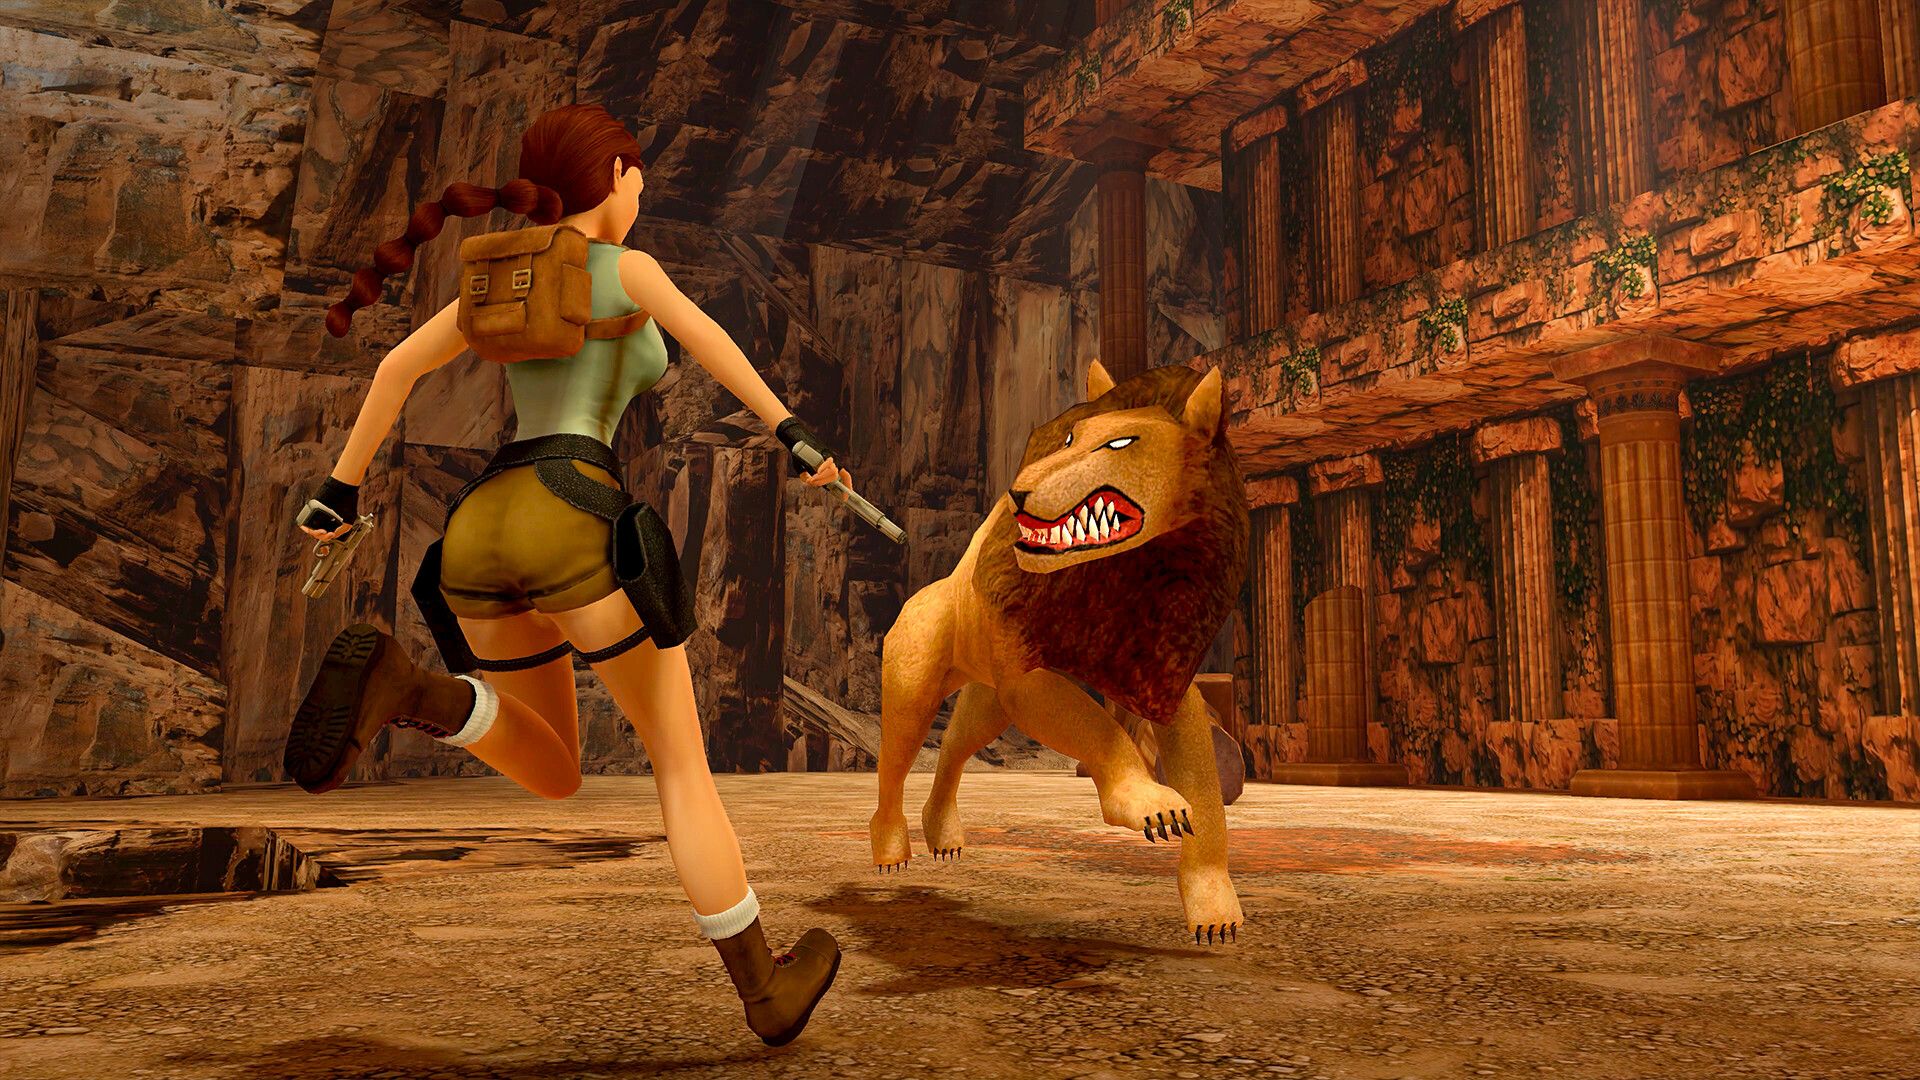 Tomb Raider I-II-III Remastered details enhancements, new features